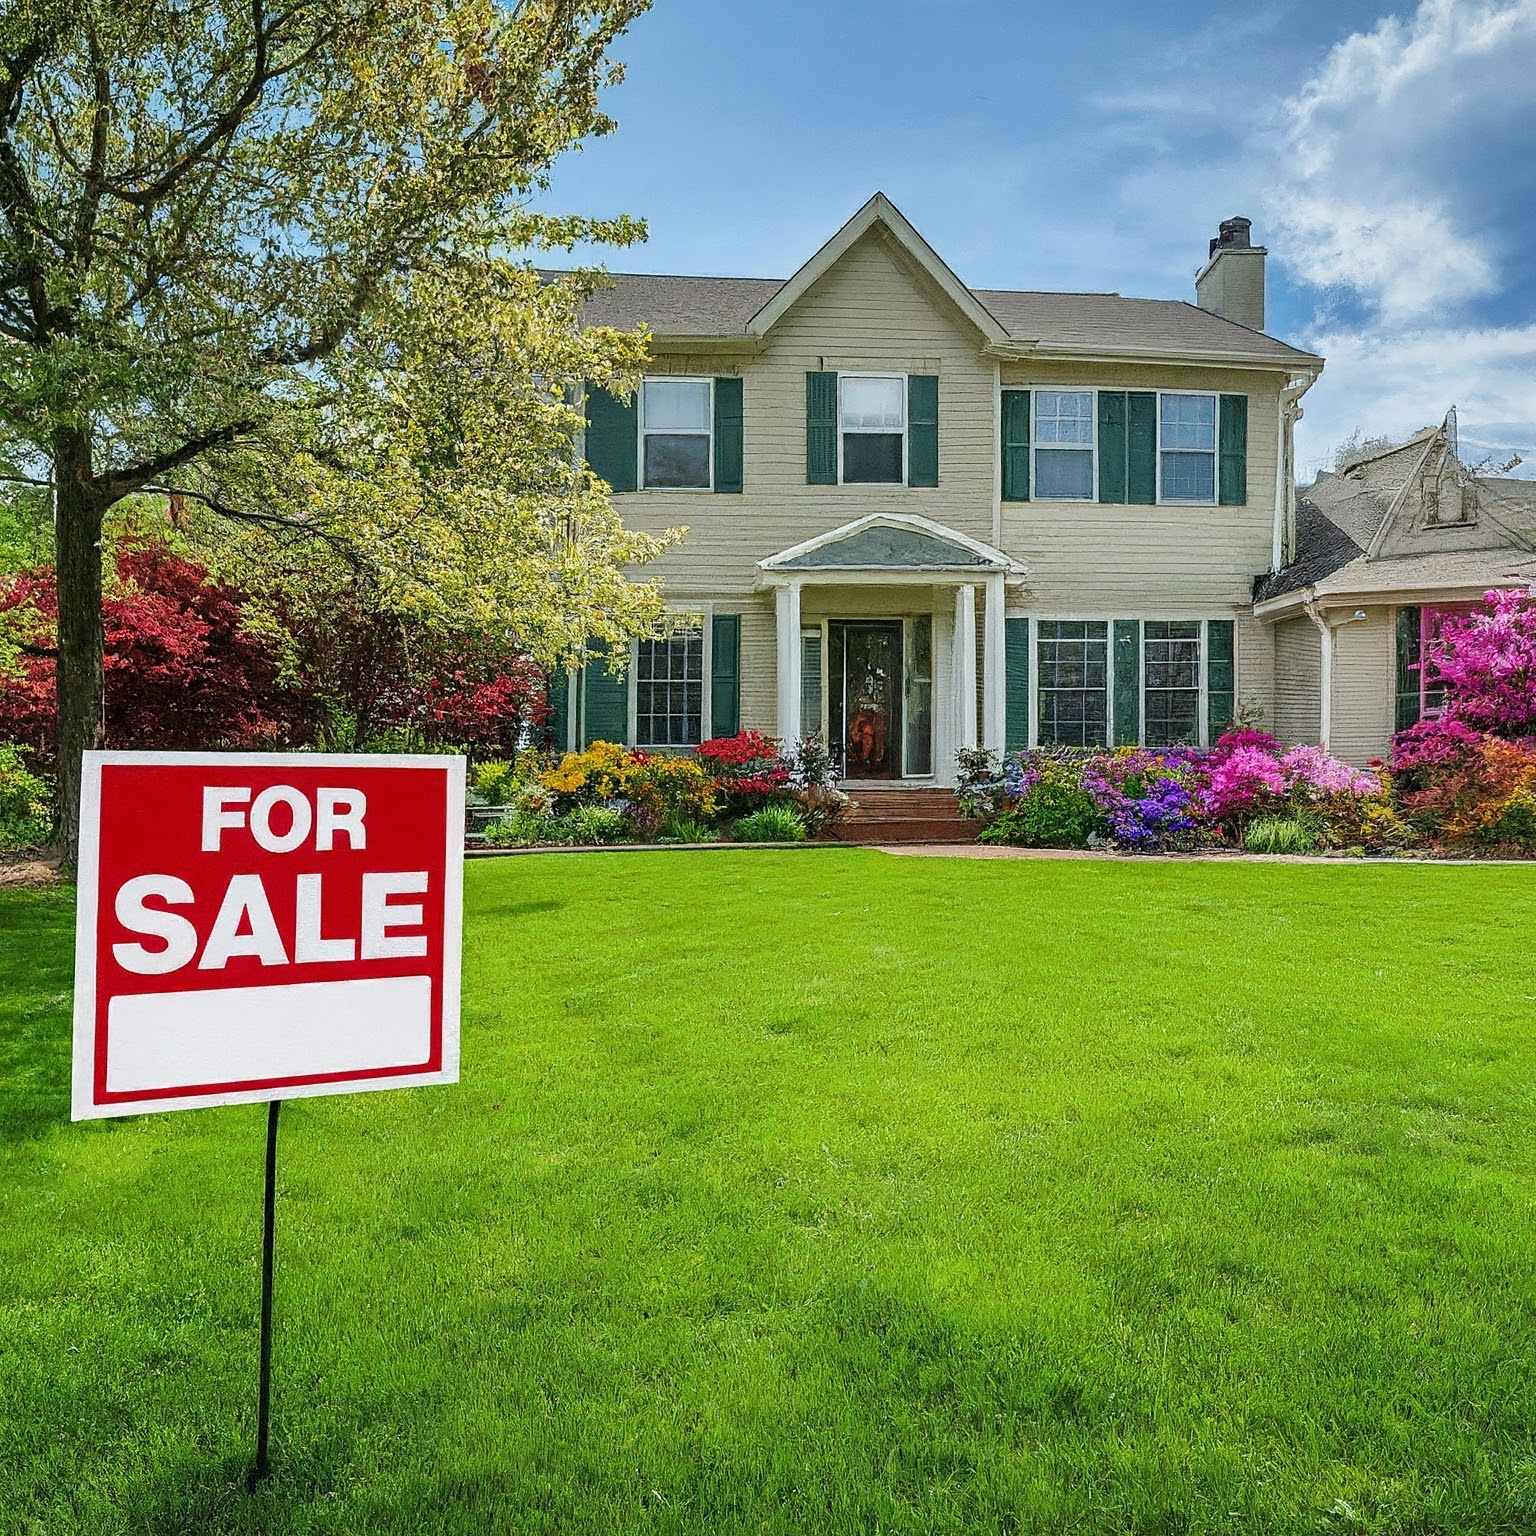 Selling Your Home? What to Expect in the Changing Market